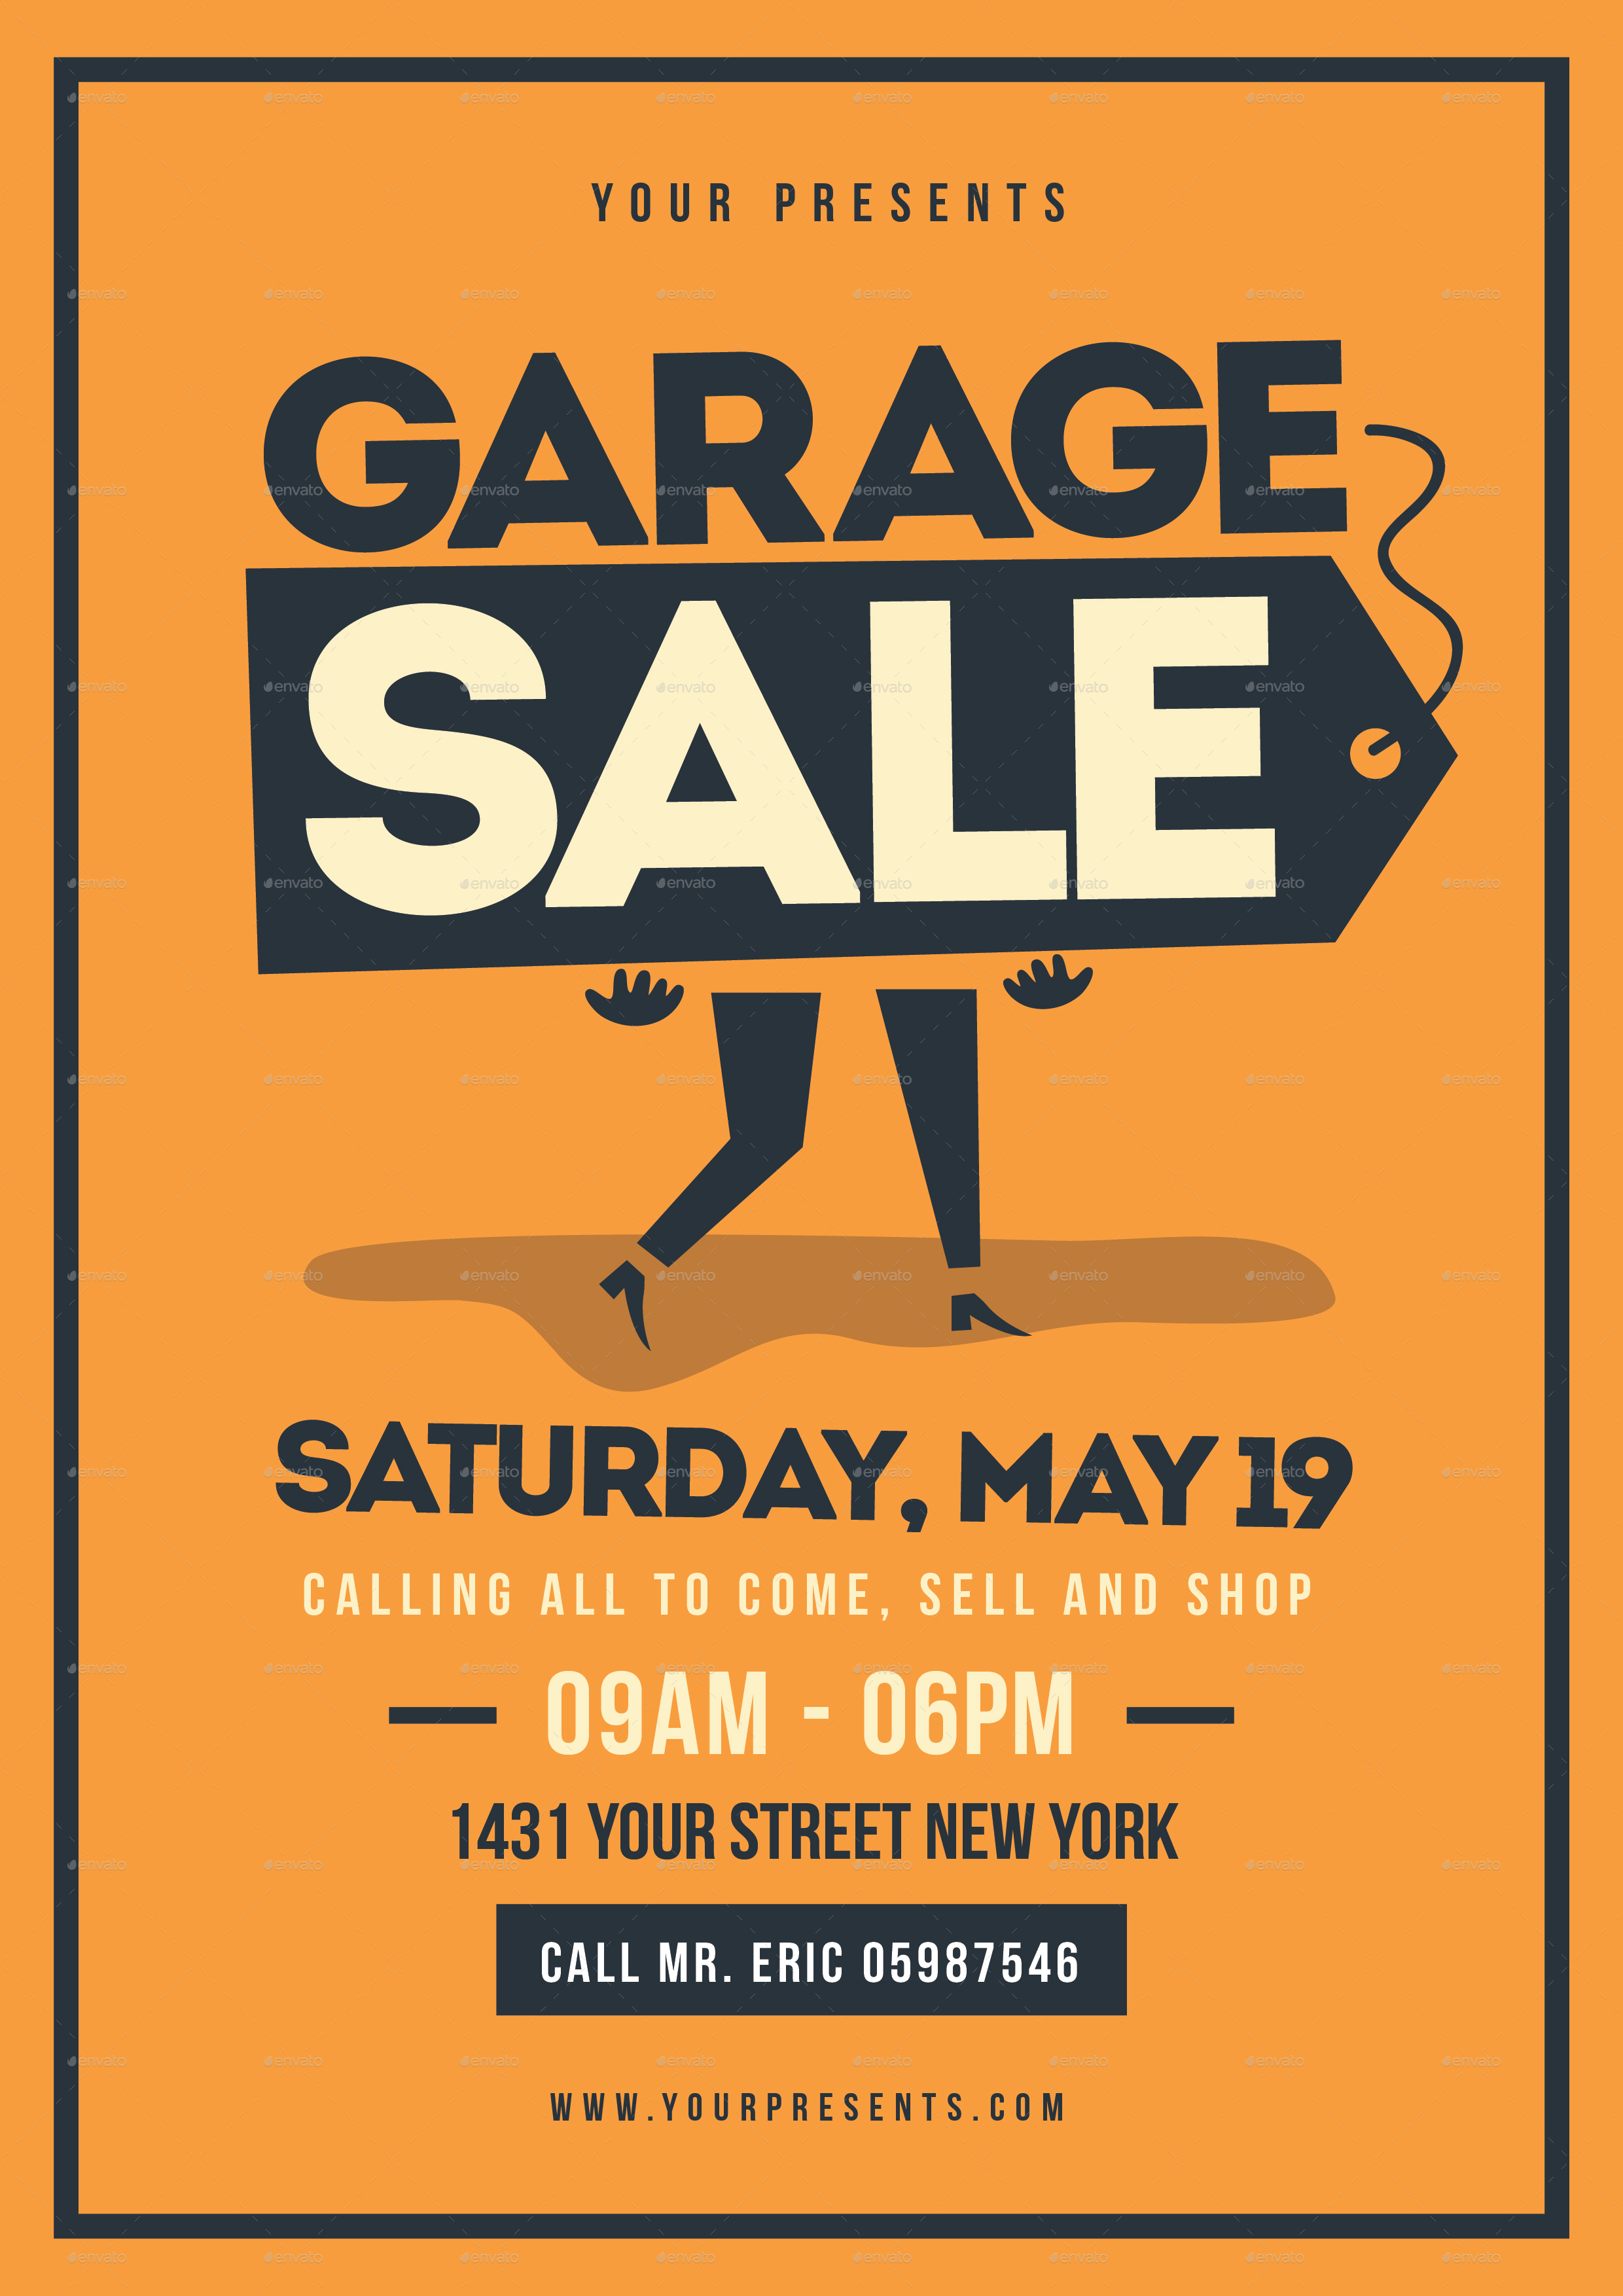 Retro Garage Sale Flyer by lilynthesweetpea  GraphicRiver In Garage Sale Flyer Template